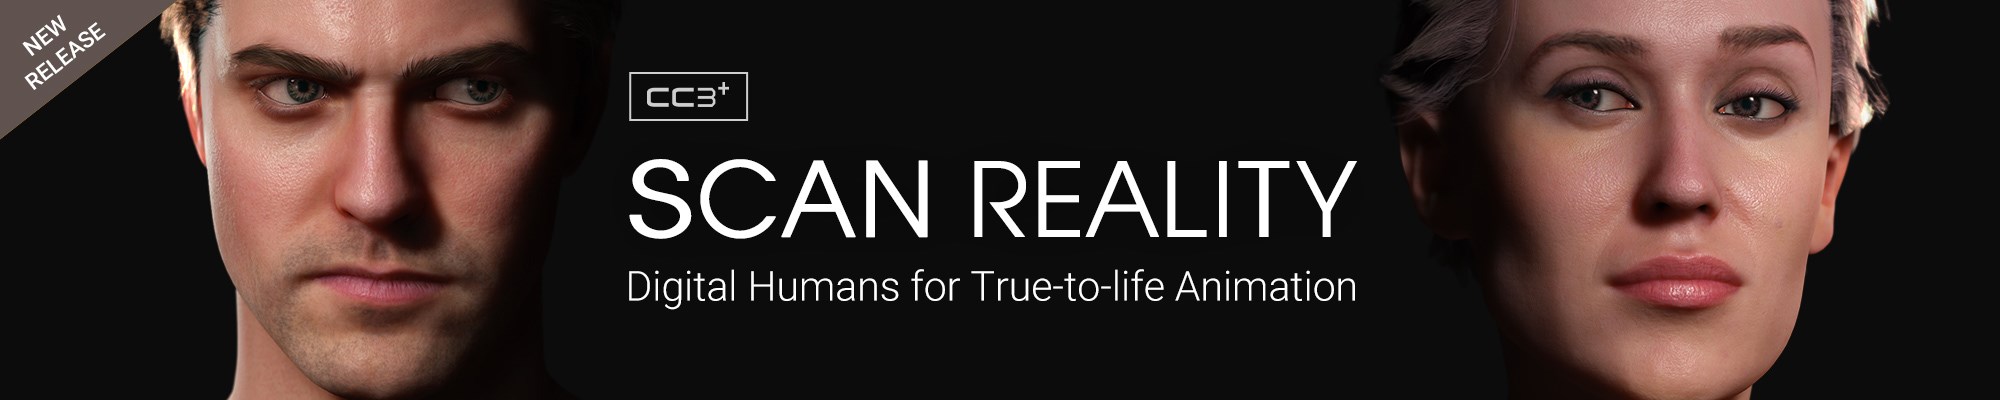 Scan Reality - Digital Humans for True-to-life Animation